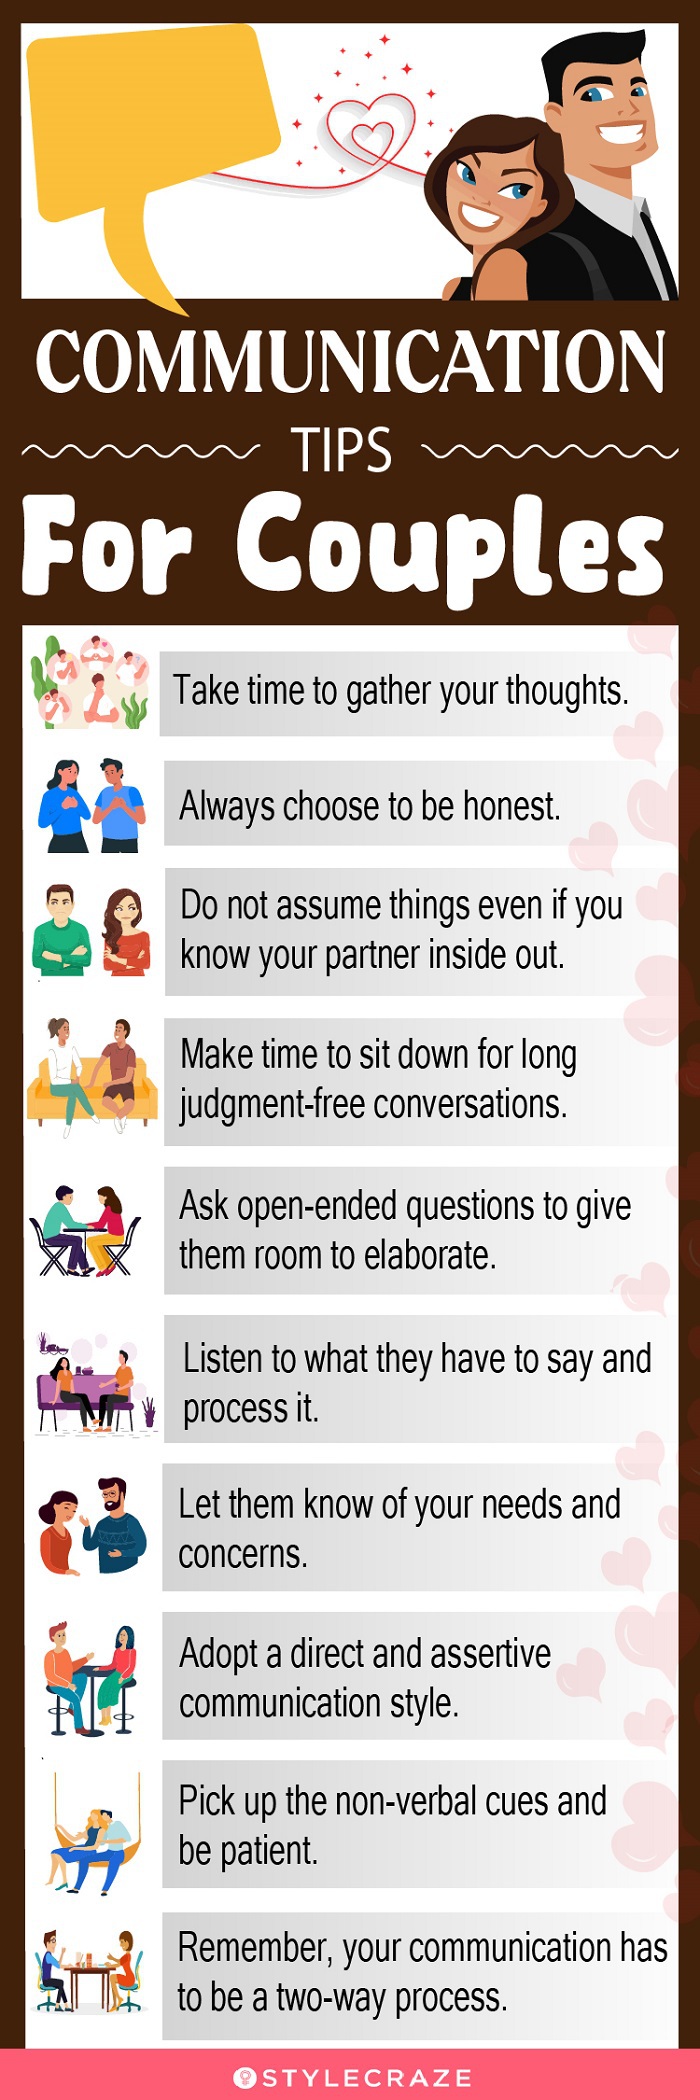 communication tips for couples (infographic)